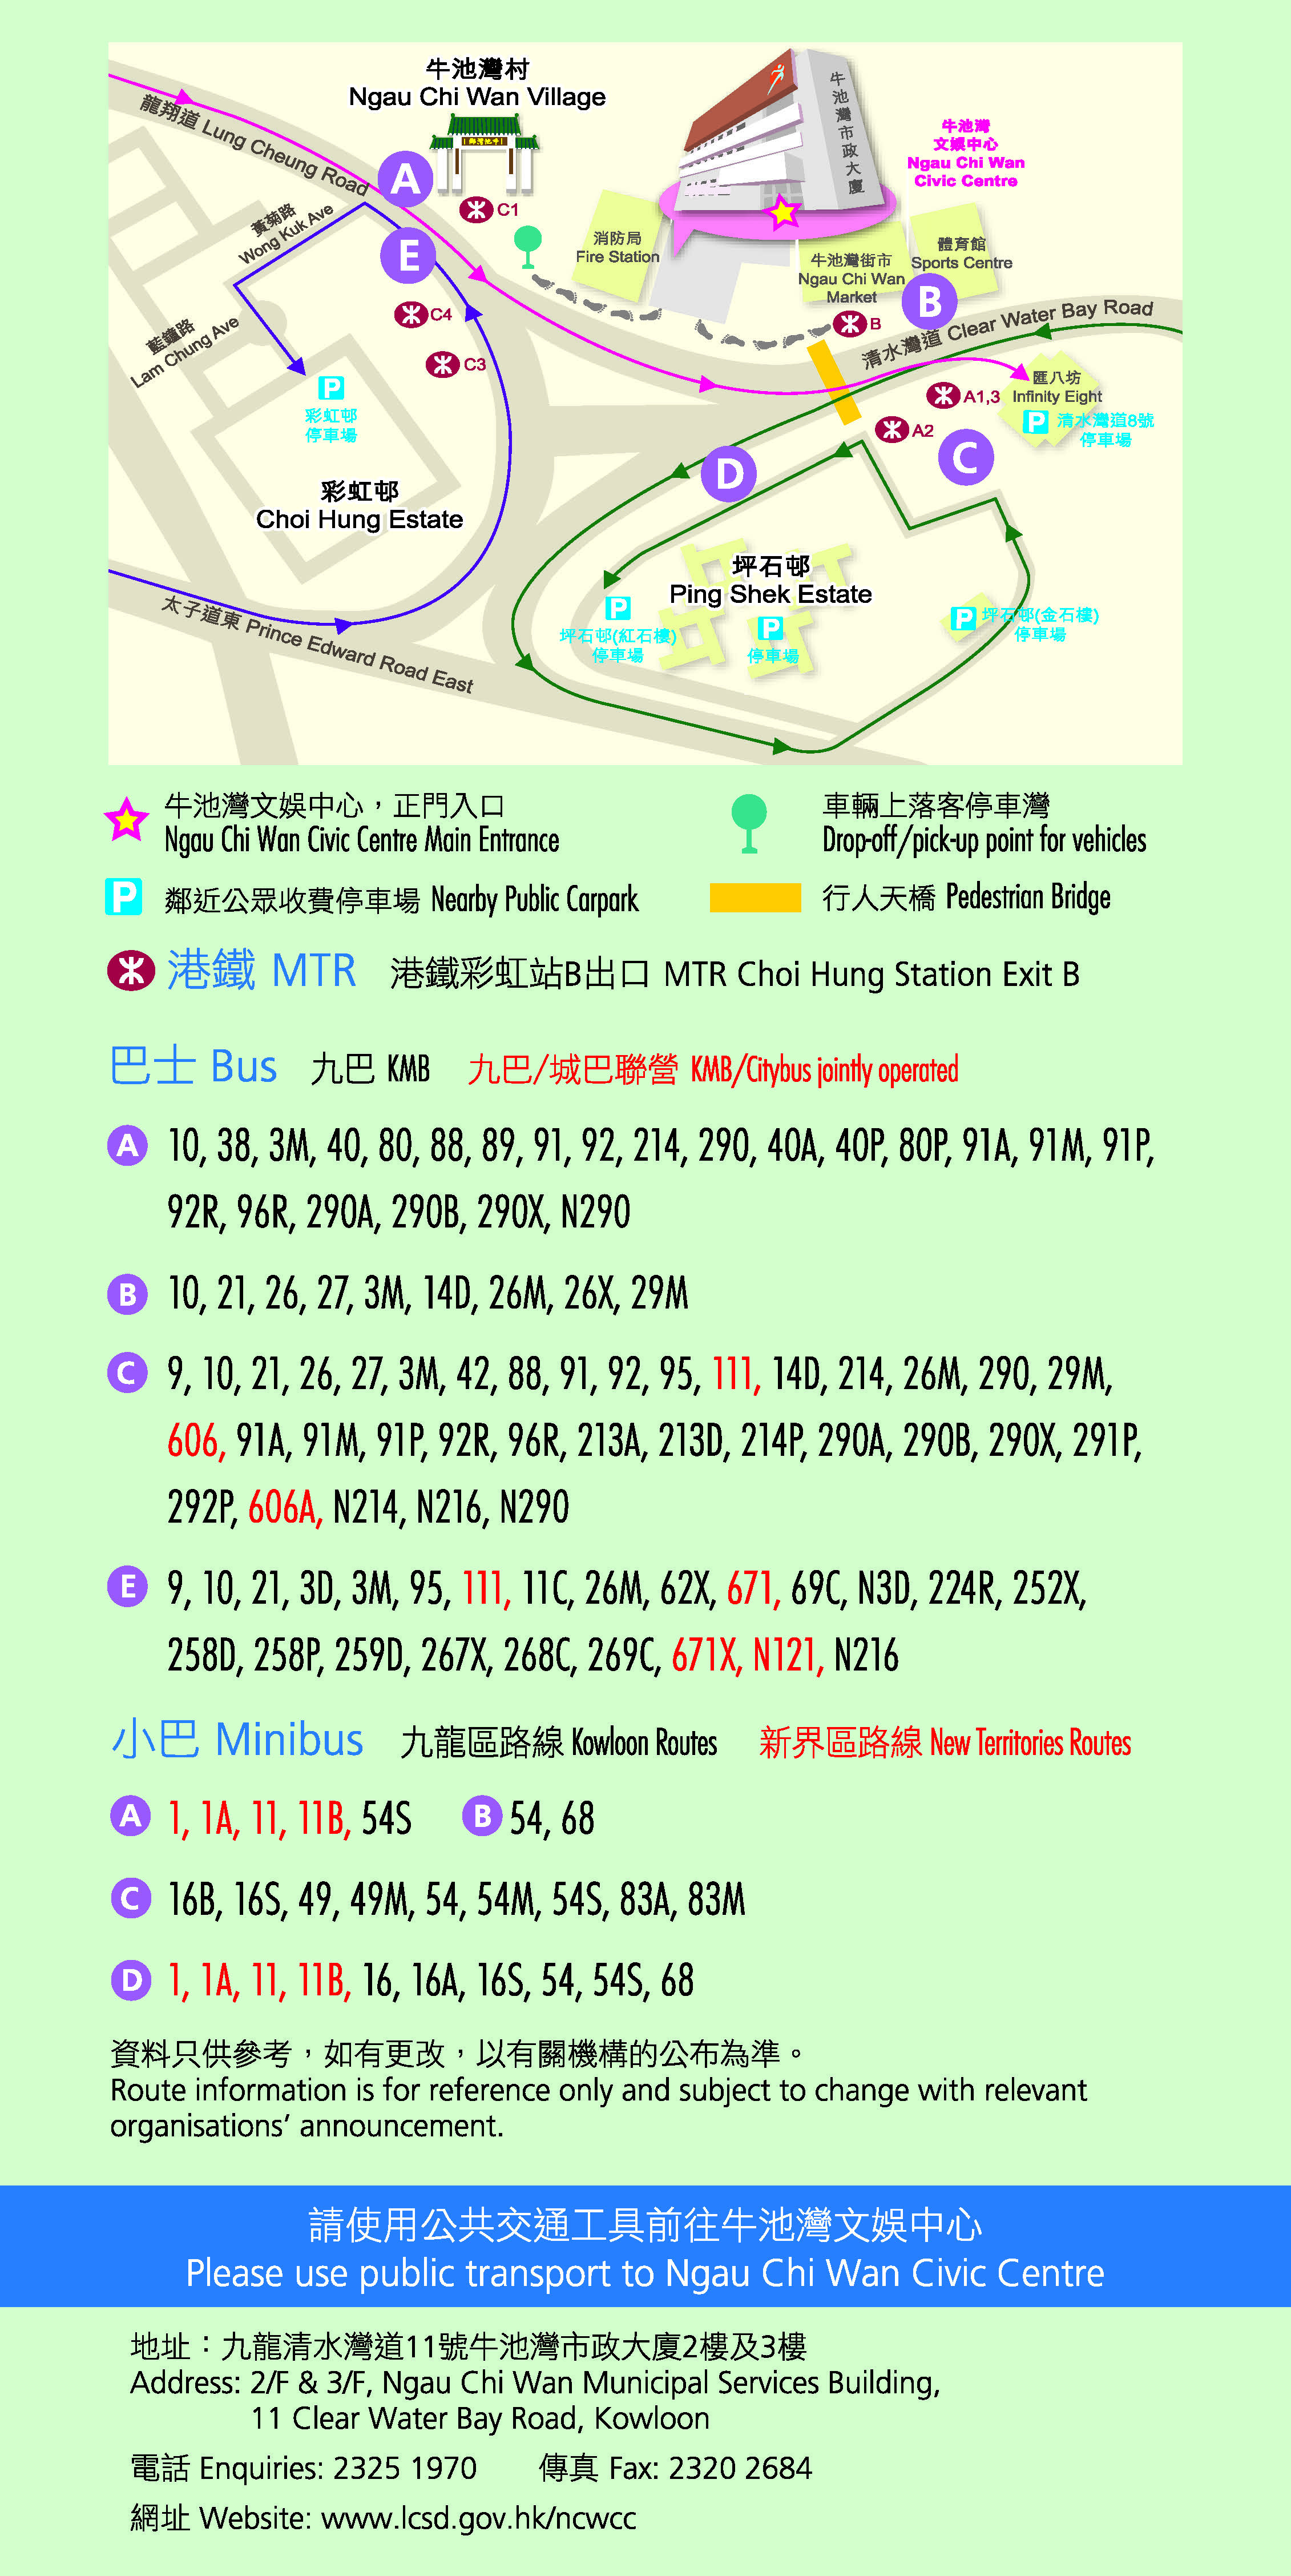 Ngau Chi Wan Civic Centre Location Map and Transportation